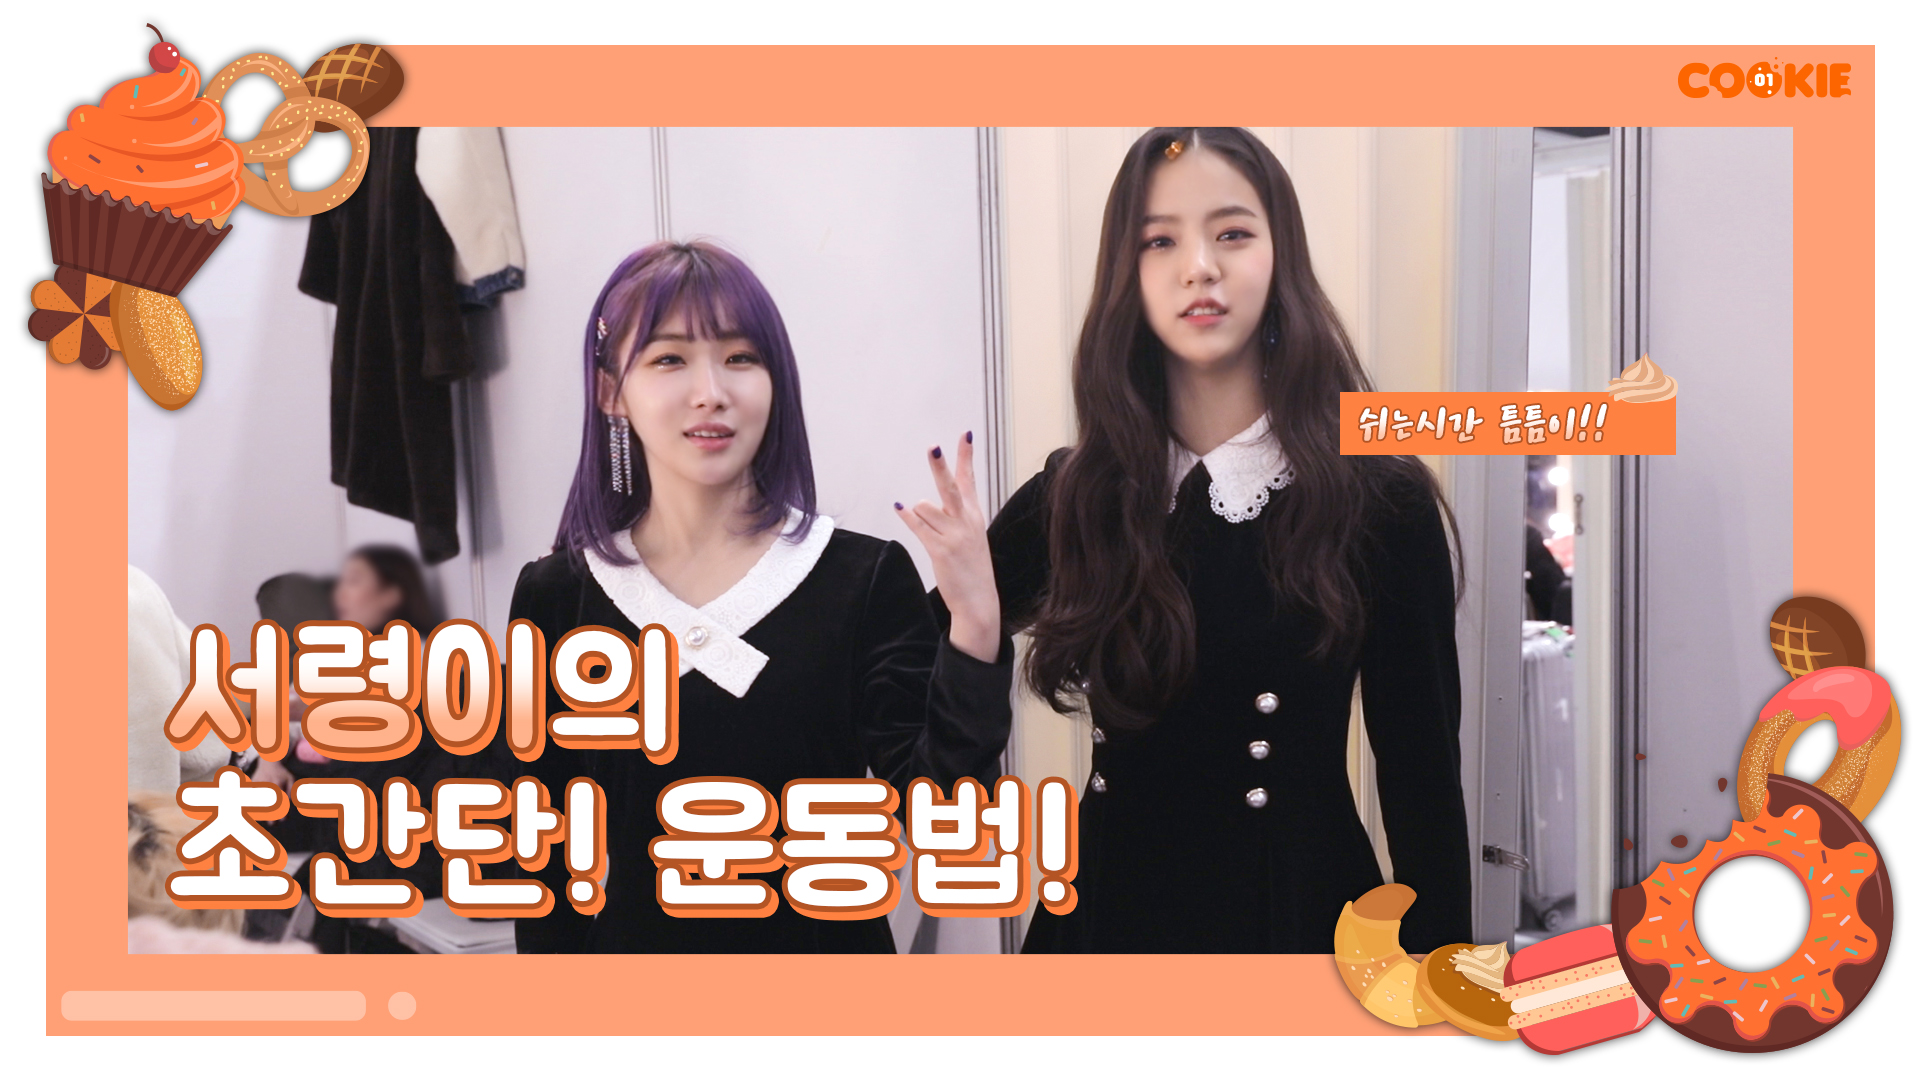 [GWSN 01COOKIE] Seoryoung's so simple execrcise routine!